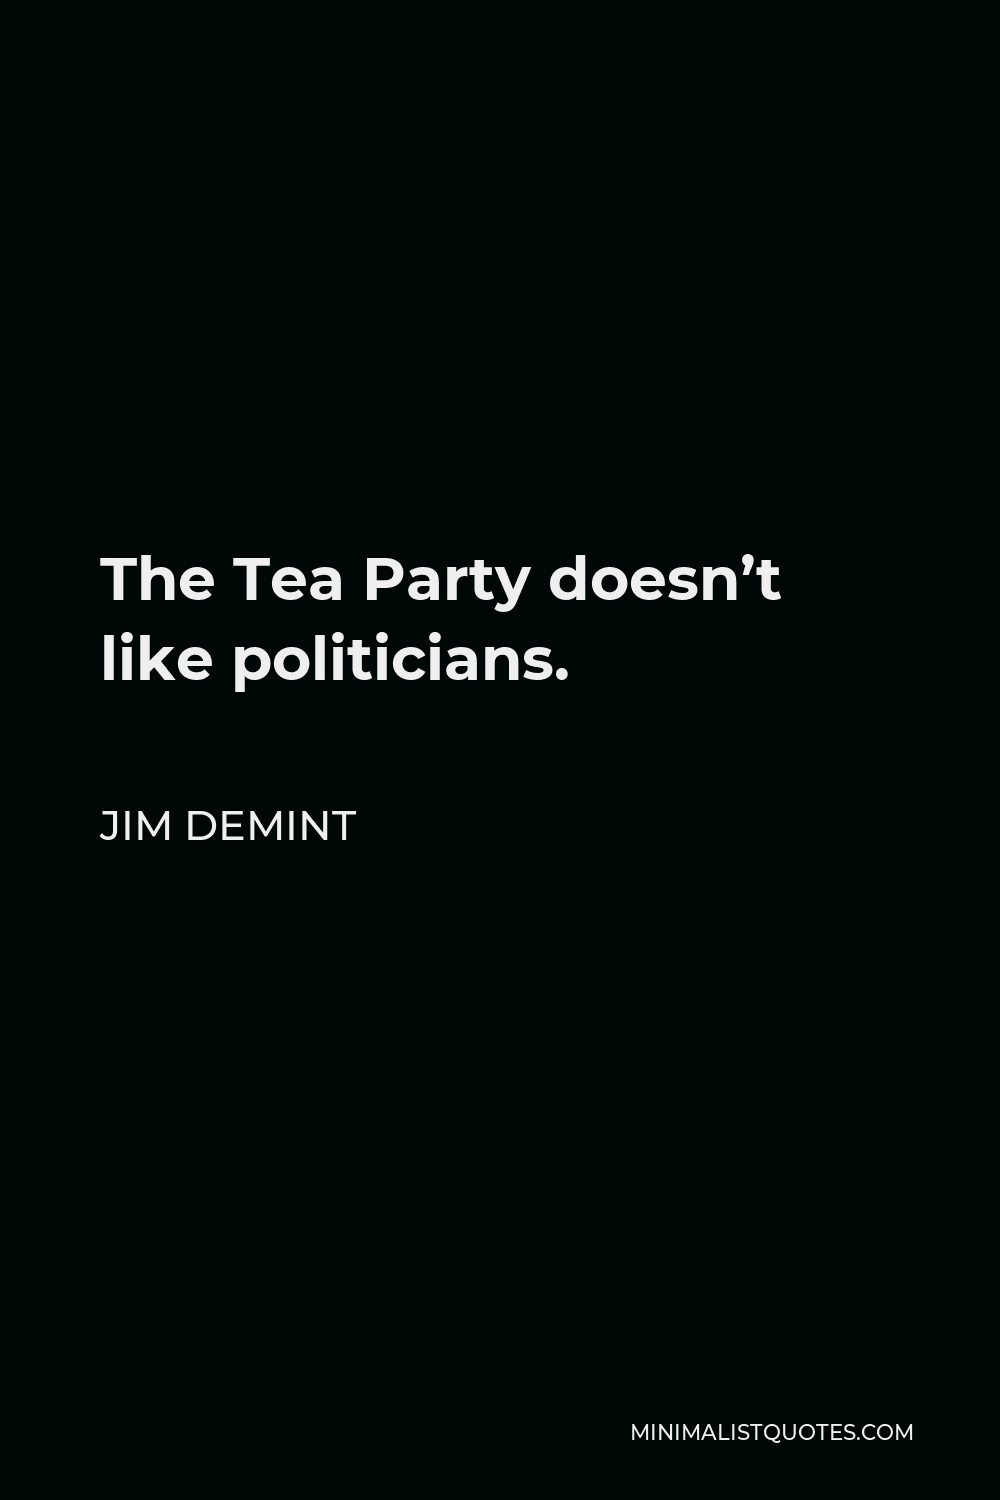 Jim Demint Quote The Tea Party Doesnt Like Politicians 4067